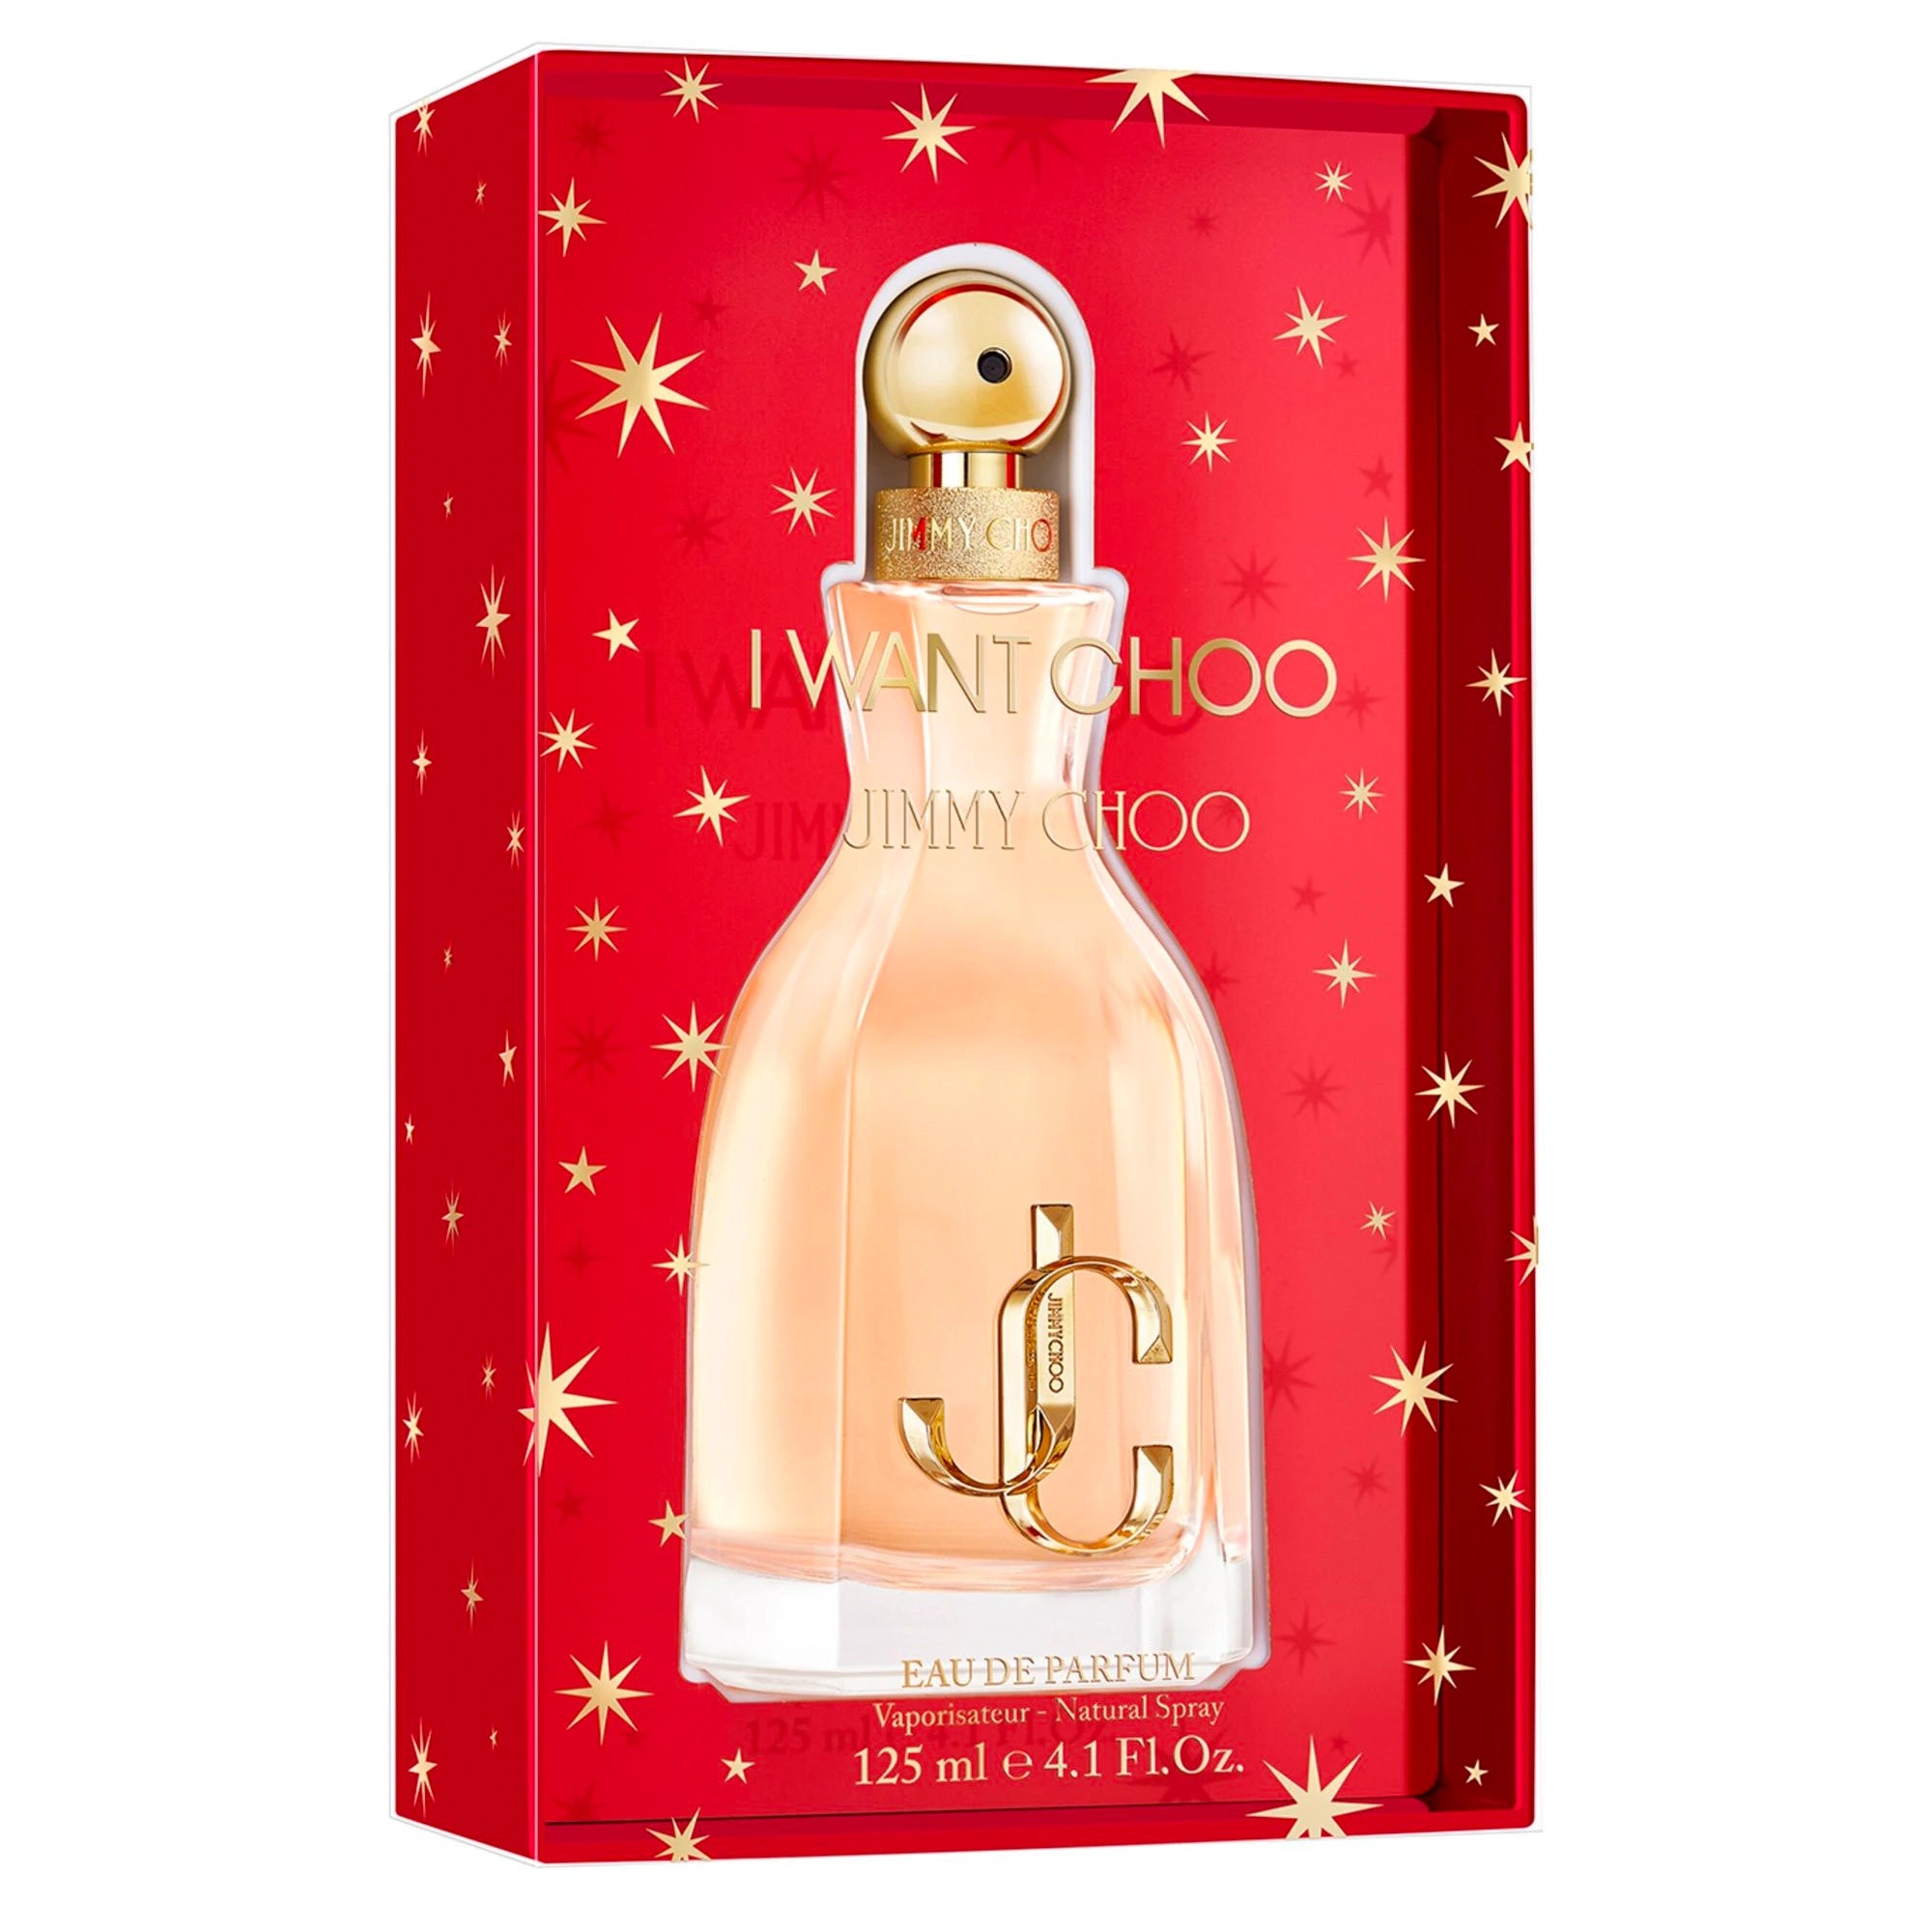 <span data-mce-fragment="1">Jimmy Choo I Want Choo 125ml Eau de Parfum Limited Edition</span><br data-mce-fragment="1">
<p data-mce-fragment="1">Iconic and playful, 'I Want Choo' is a floral gourmand woody fragrance that embodies the vivacious and confident Jimmy Choo woman. A blend of citrus and velvety peach creates a tantalizing top note, while the warm and sensual blend of red spider lily and jasmine sambac makes it impossible to resist. Perfect for a girls' night in filled with laughter and joy.</p>
<br>